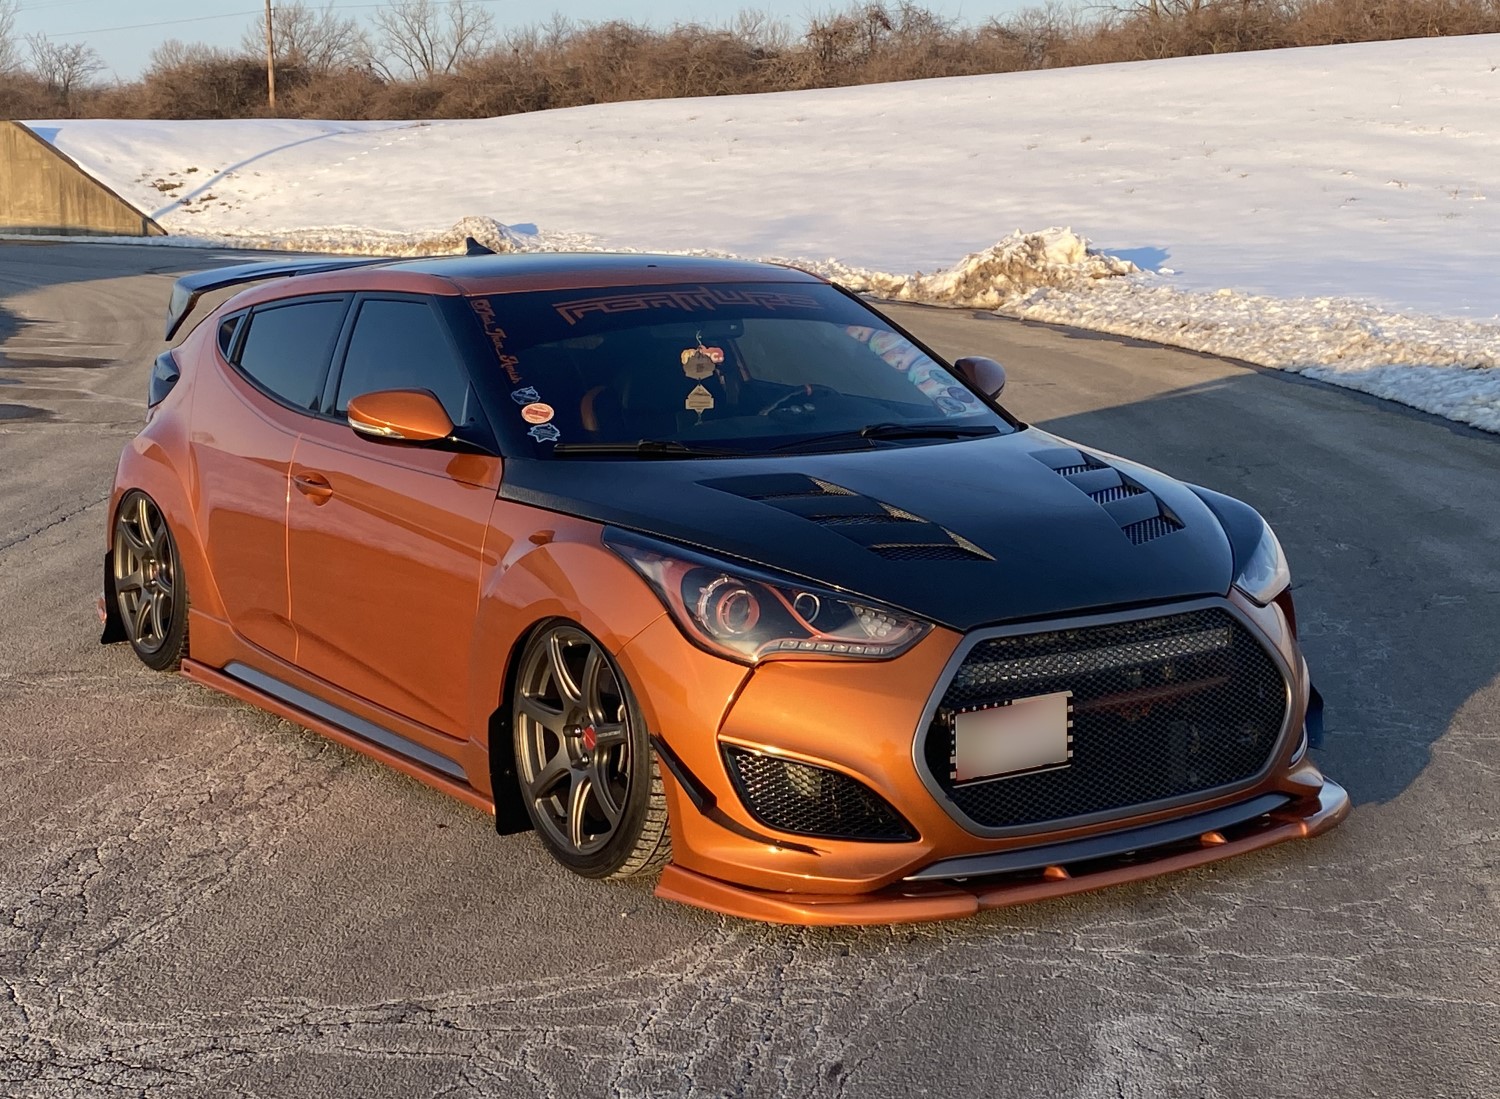 Orange Veloster Turbo Rings in the New Year with Custom Mesh Grille